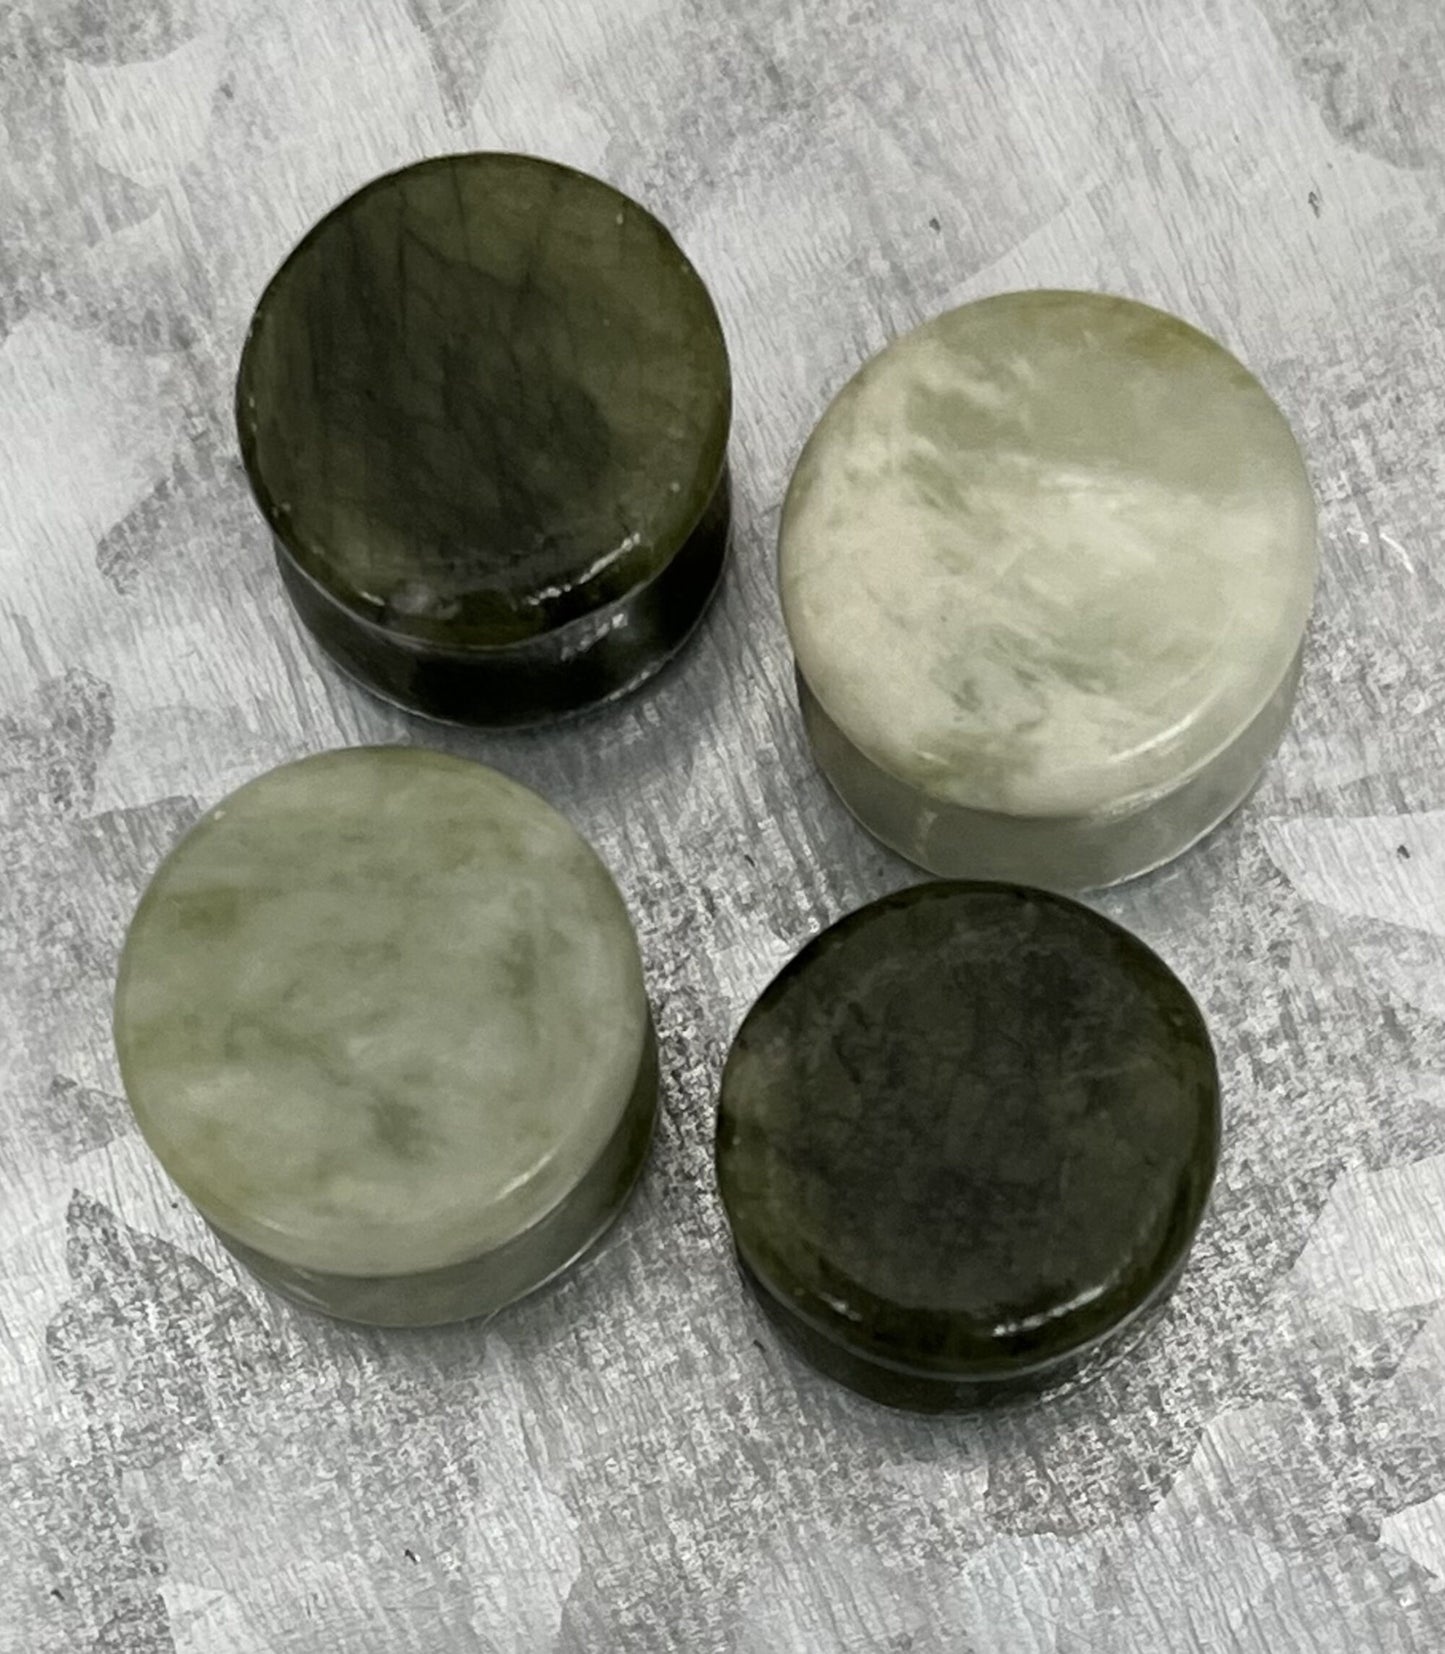 PAIR of Unique Natural South Jade Organic Stone Plugs - Gauges 4g (5mm) up to 1" (25mm) available!